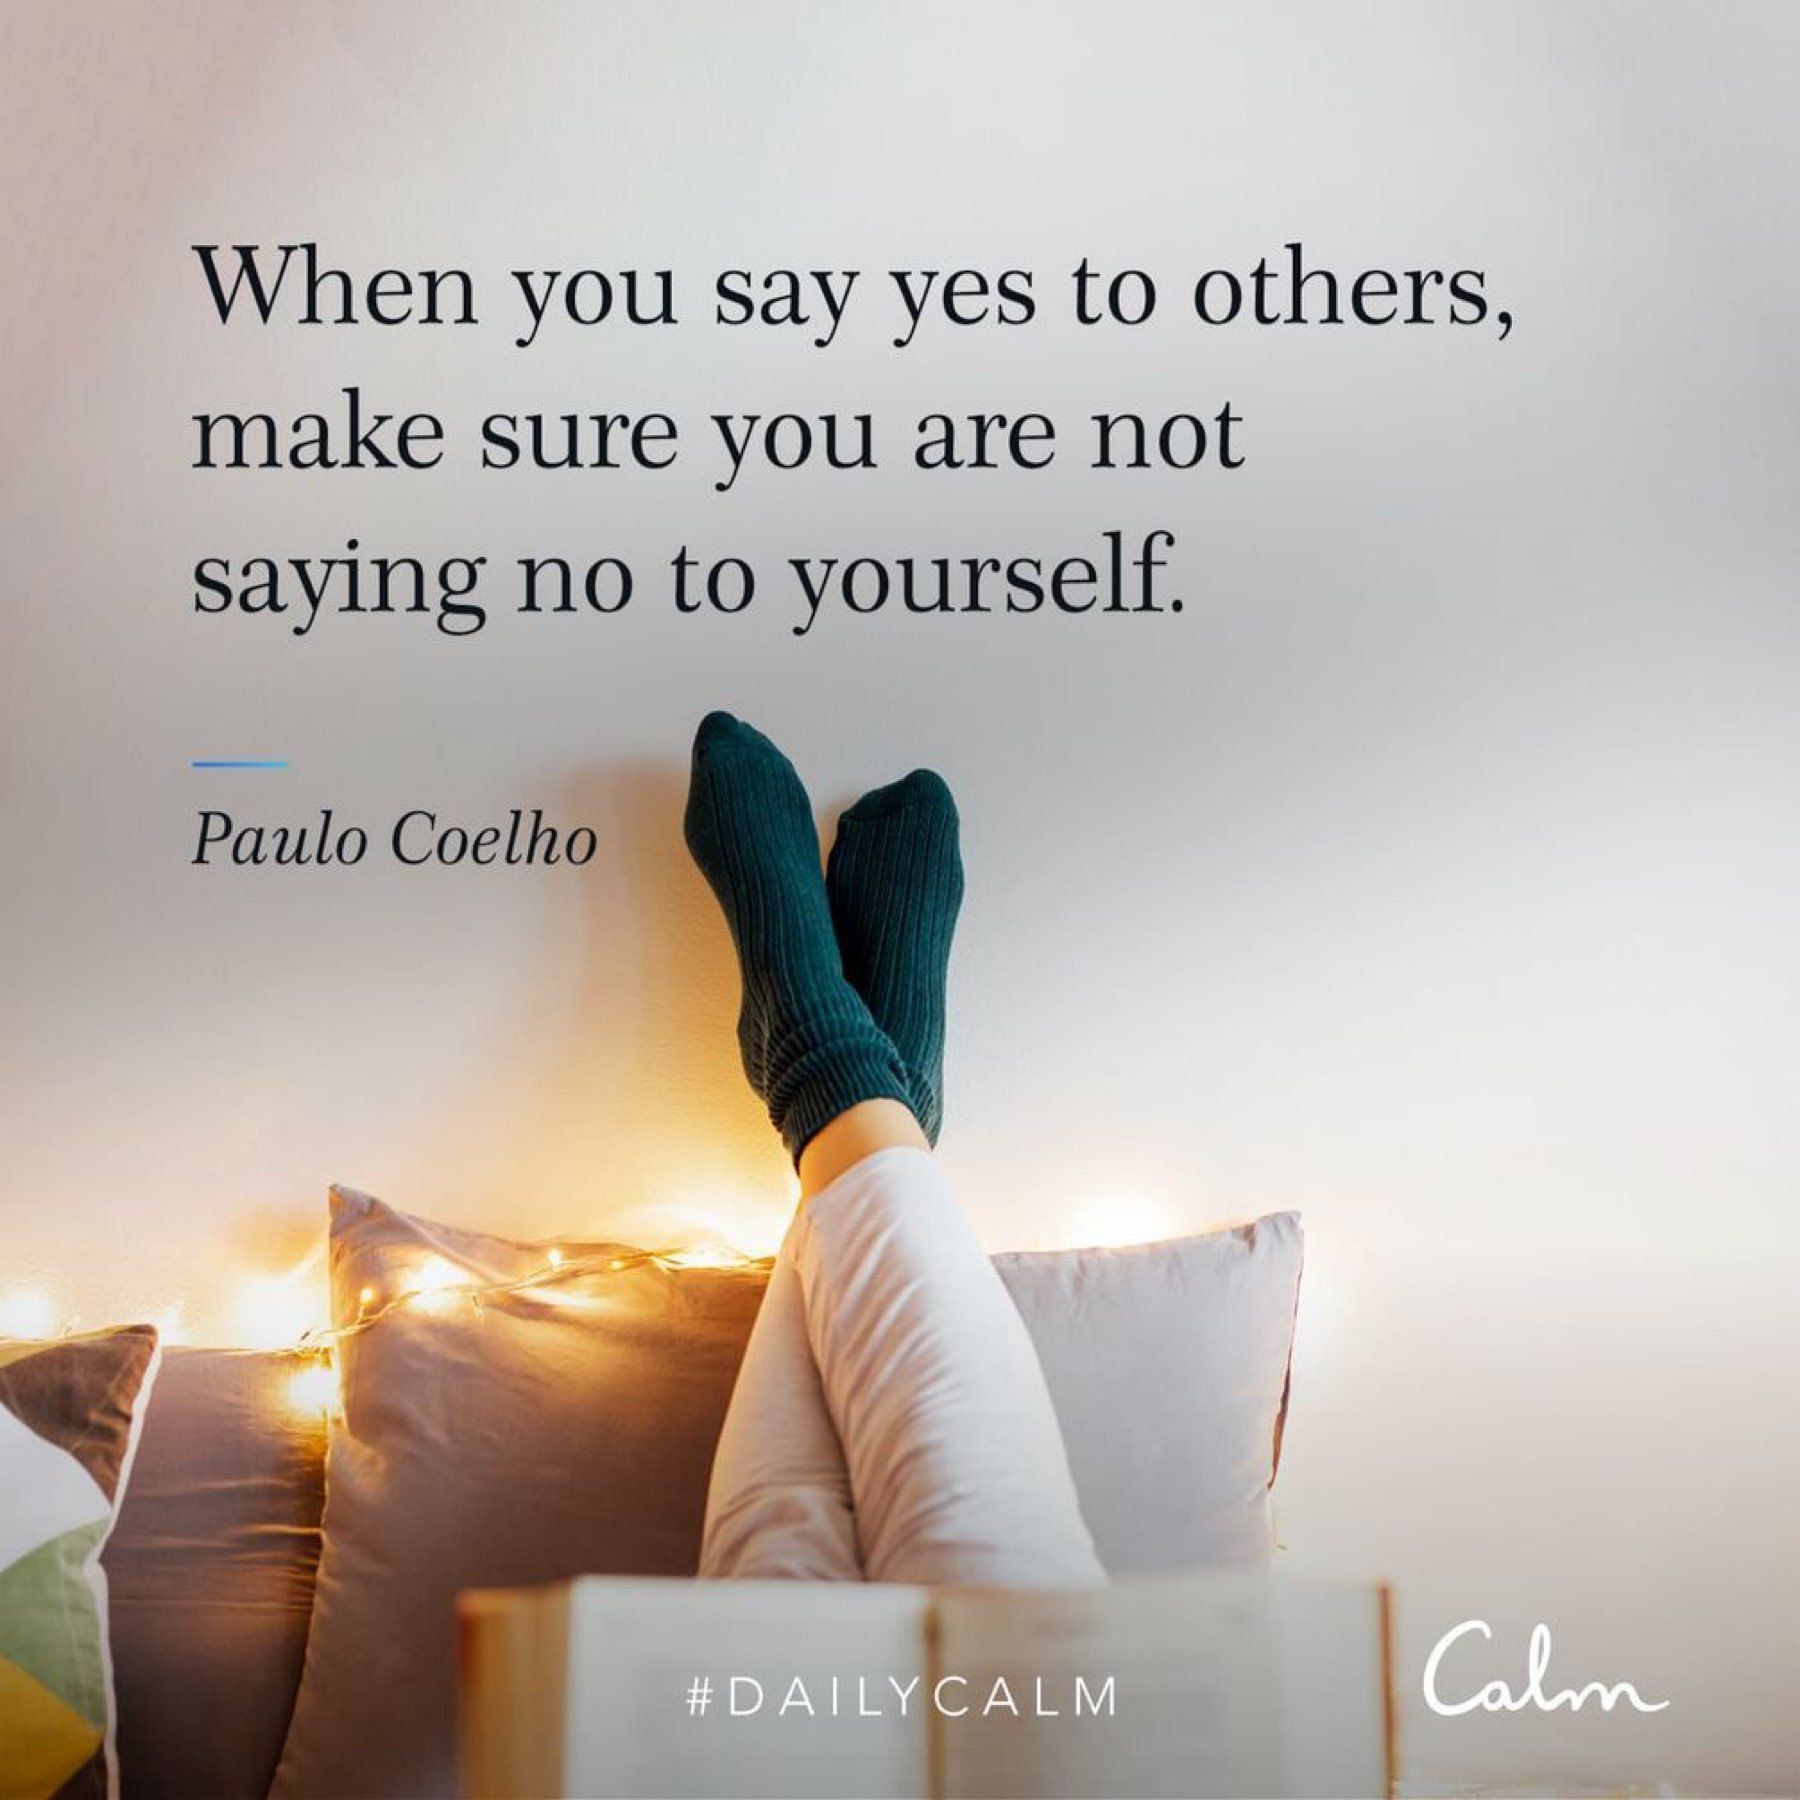 Make sure in saying yes to others that you do not say no to yourself